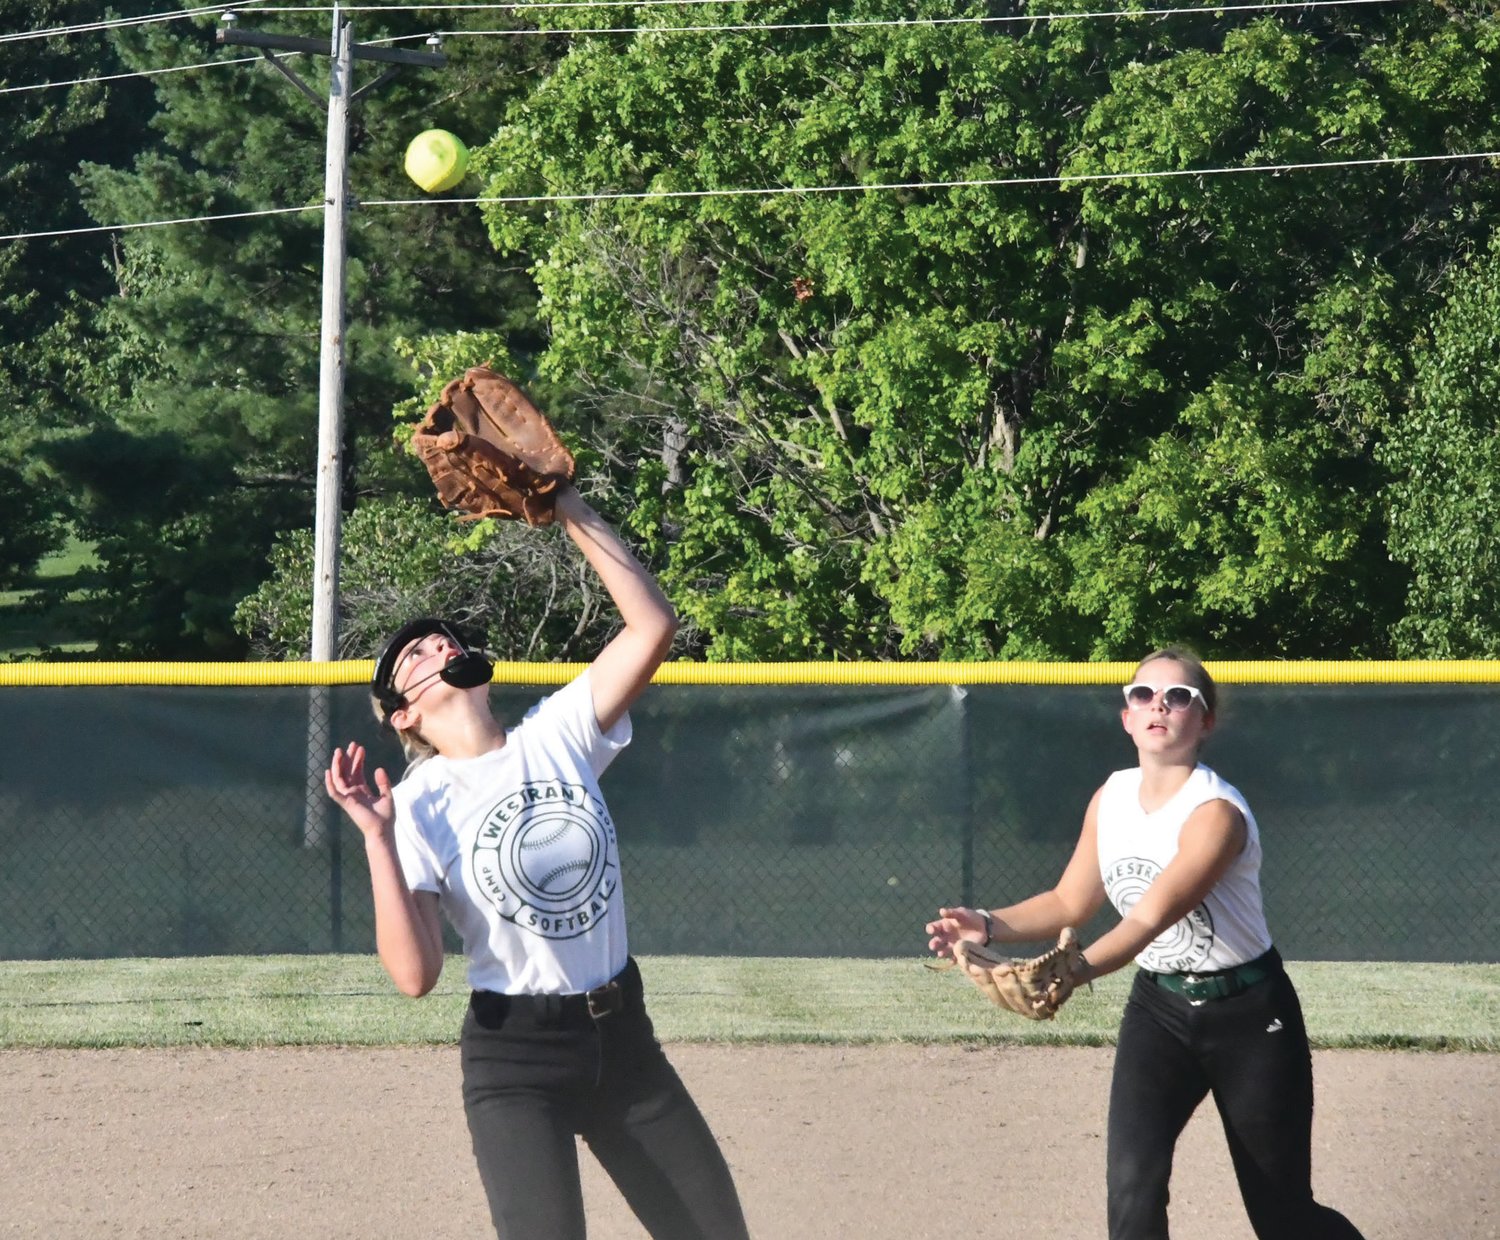 Westran High School pitcher Kyleigh Carroll (left) prepares to catch the ball while teammate Kiyah Massey looks on.